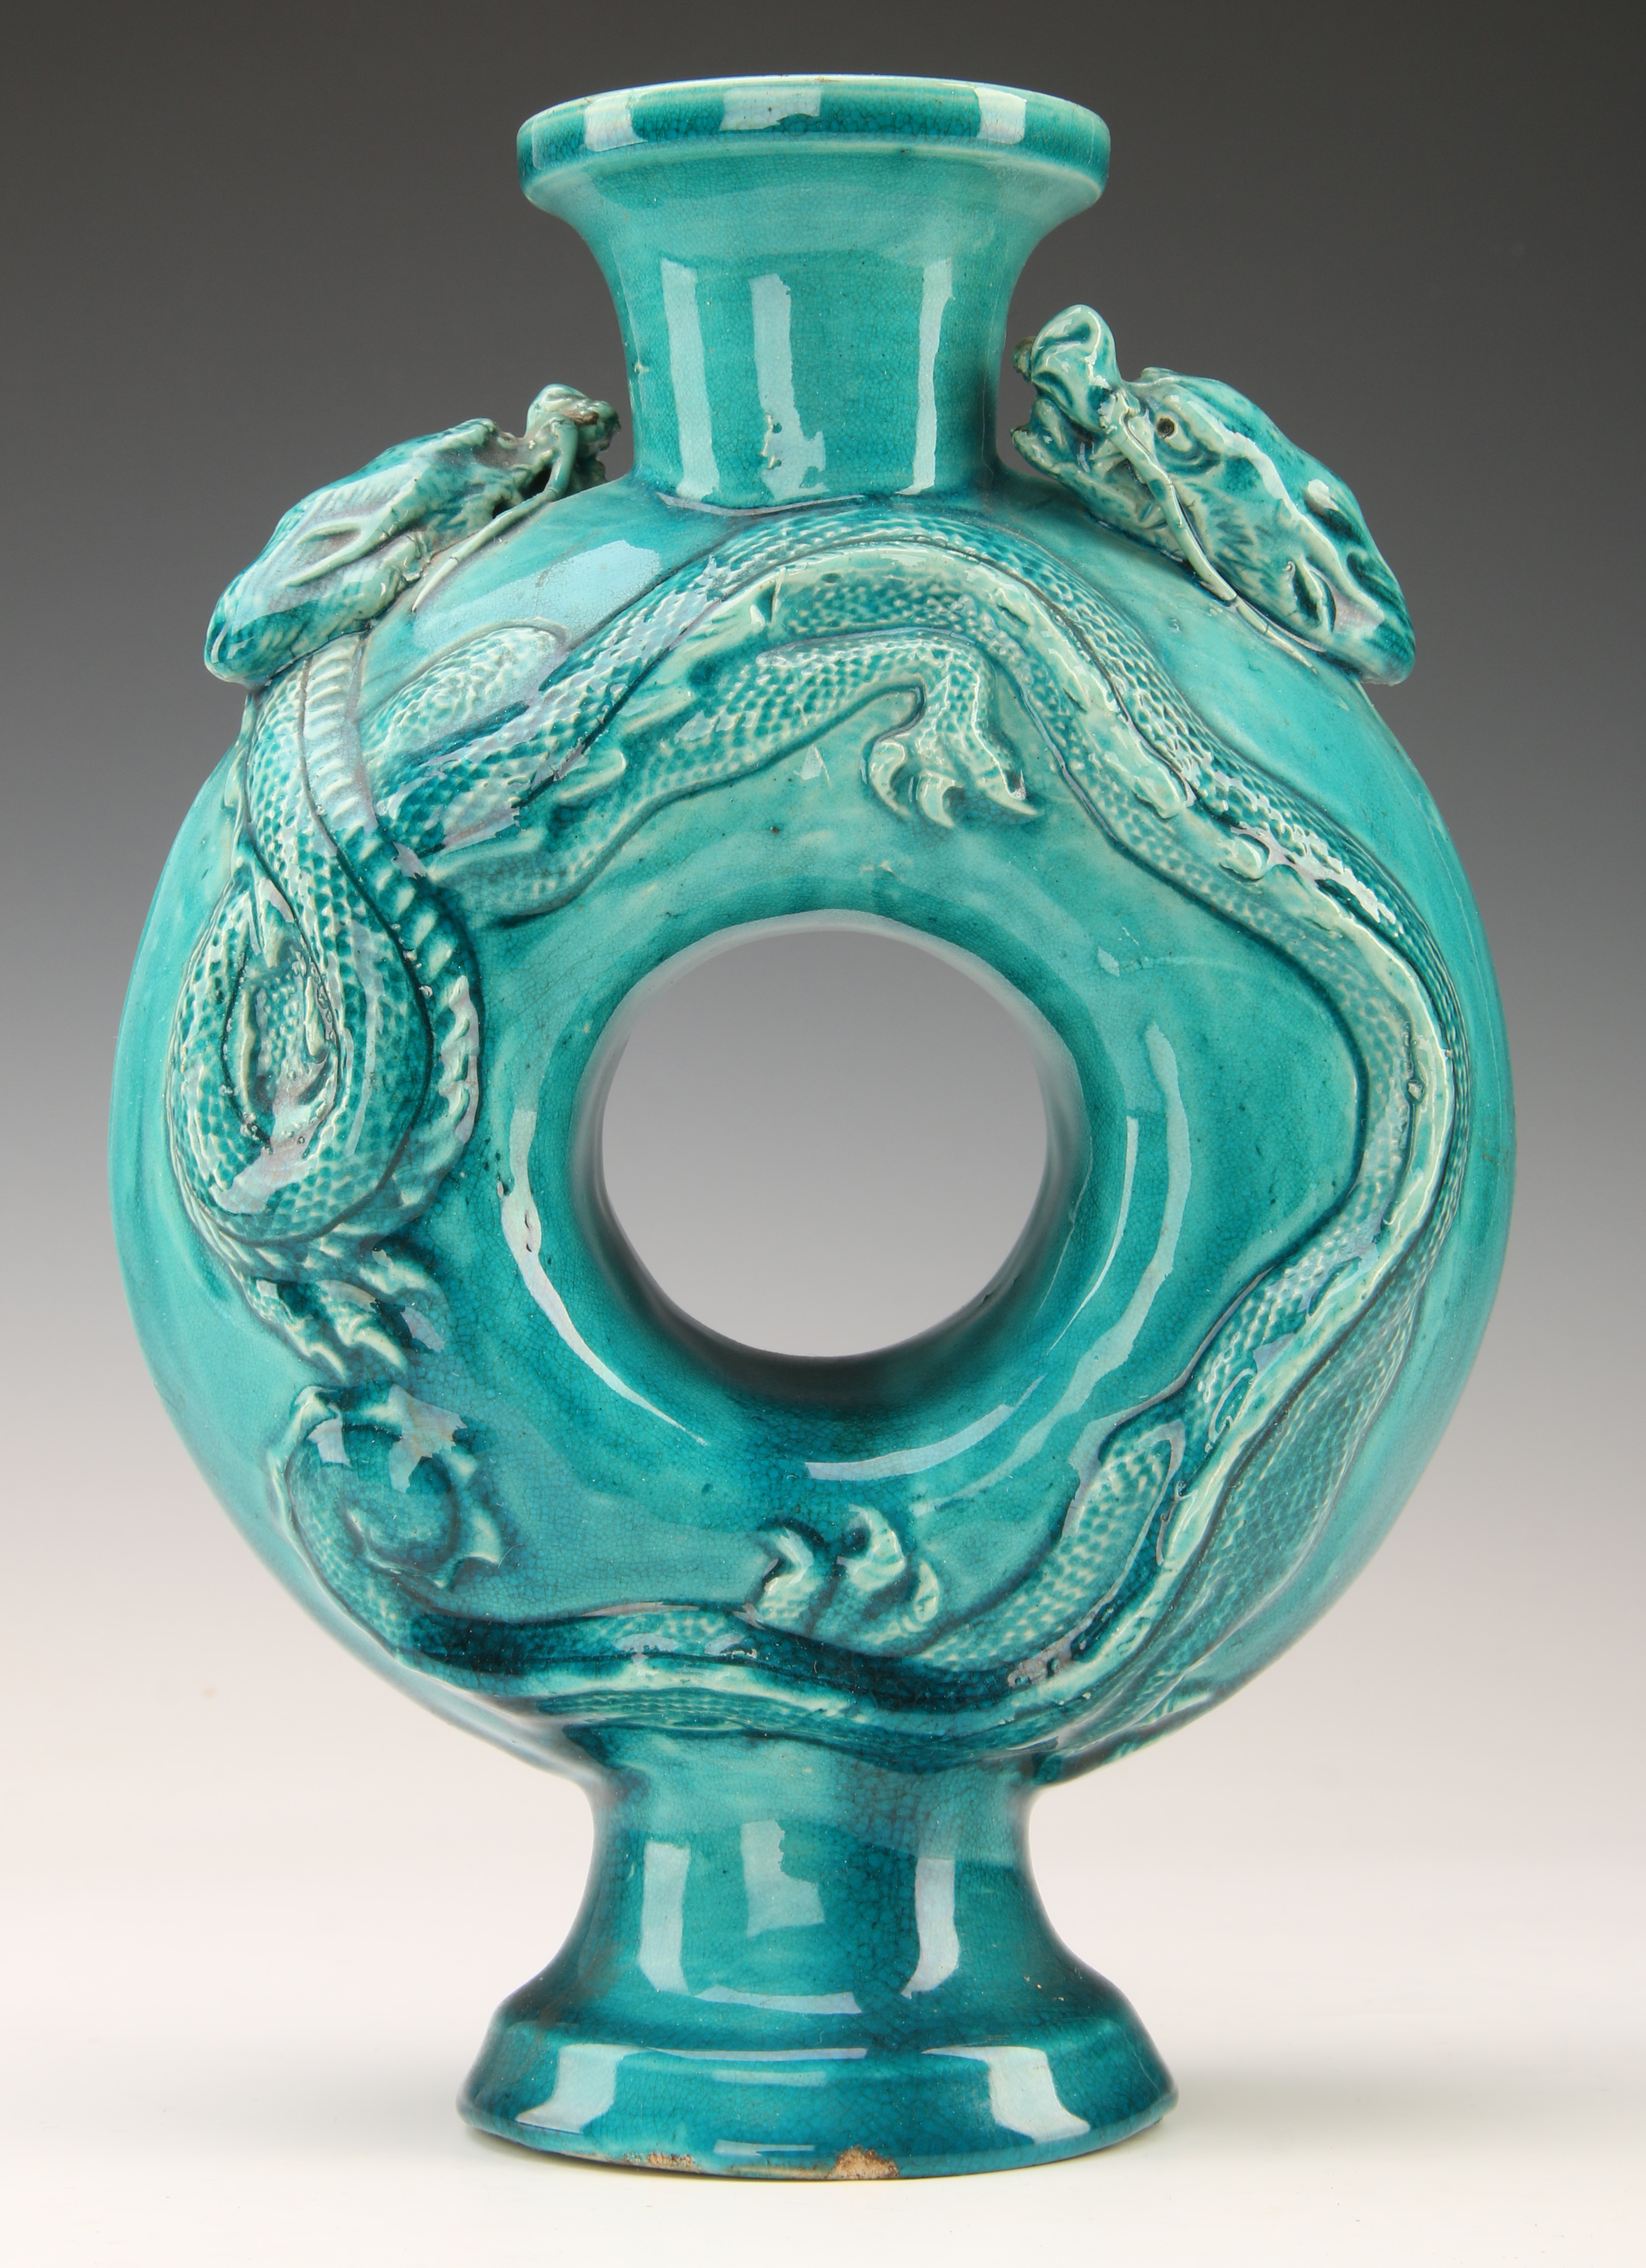 A CHINESE TURQUOISE GLAZED POTTERY VESSEL